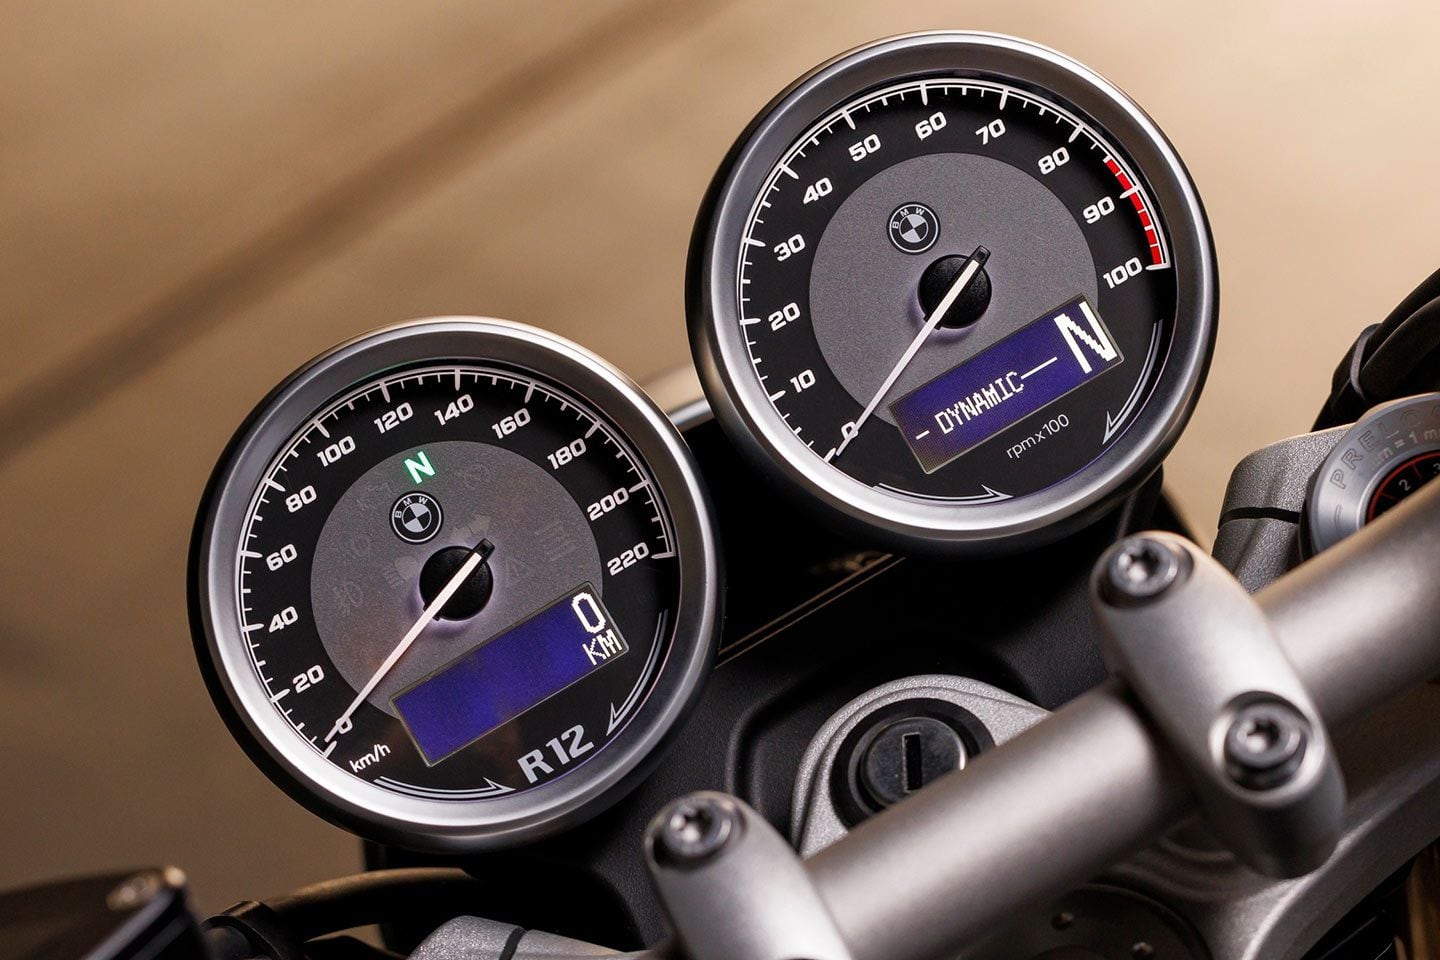 The retro theme extends to the twin gauges with a mix of analog and digital displays.